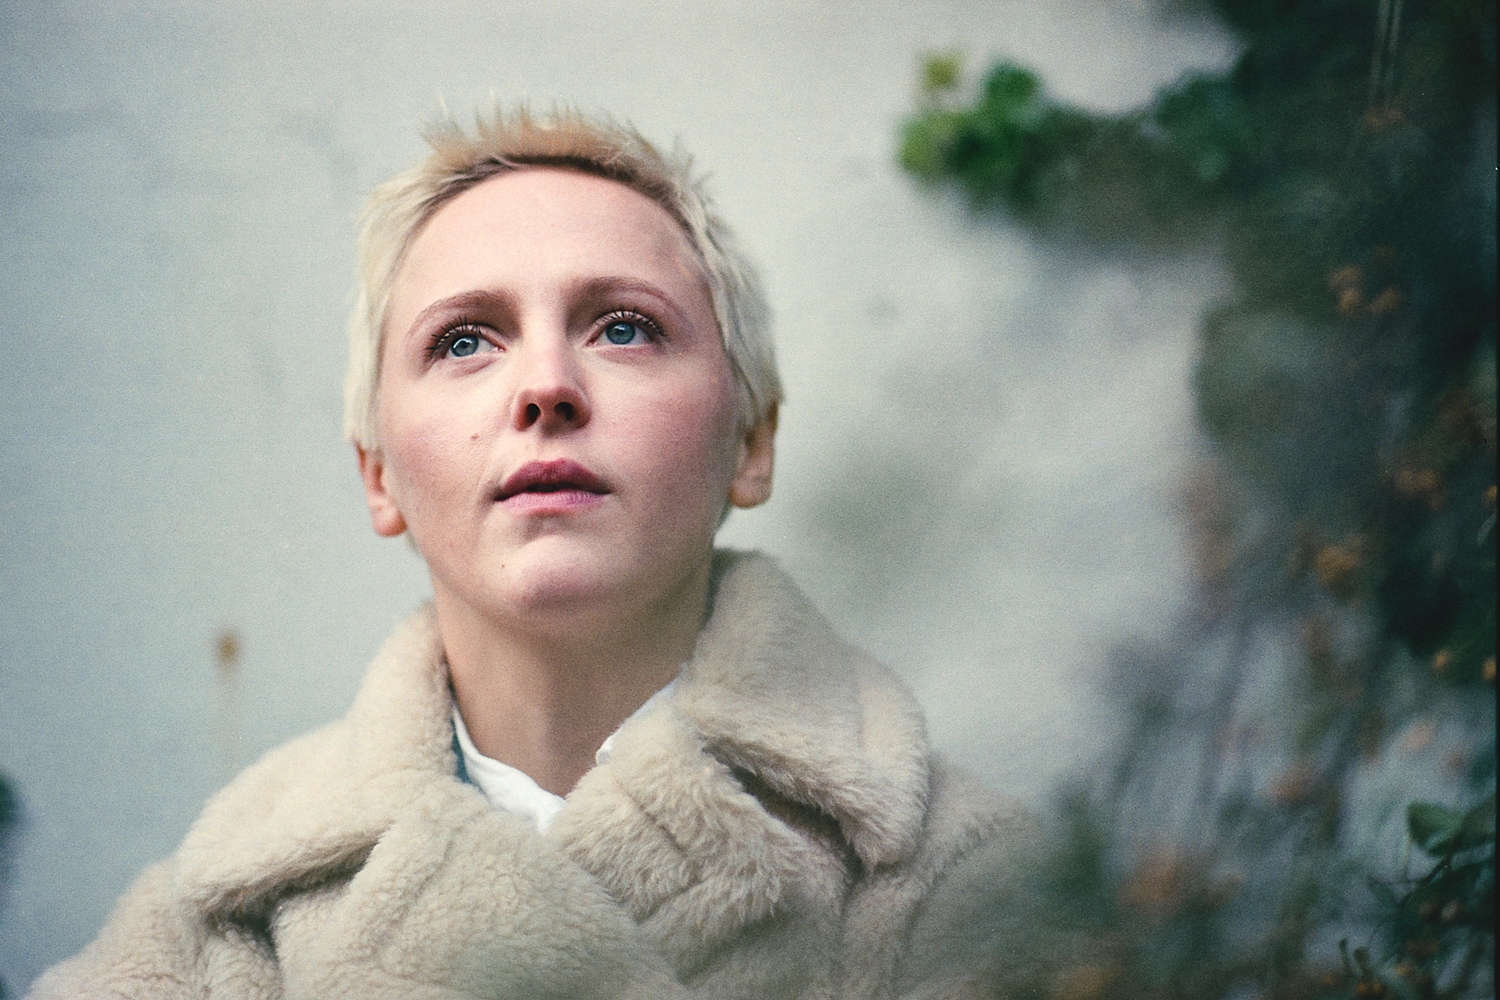 Laura Marling performs ‘I Feel Your Love’ in new ‘Short Movie’ session